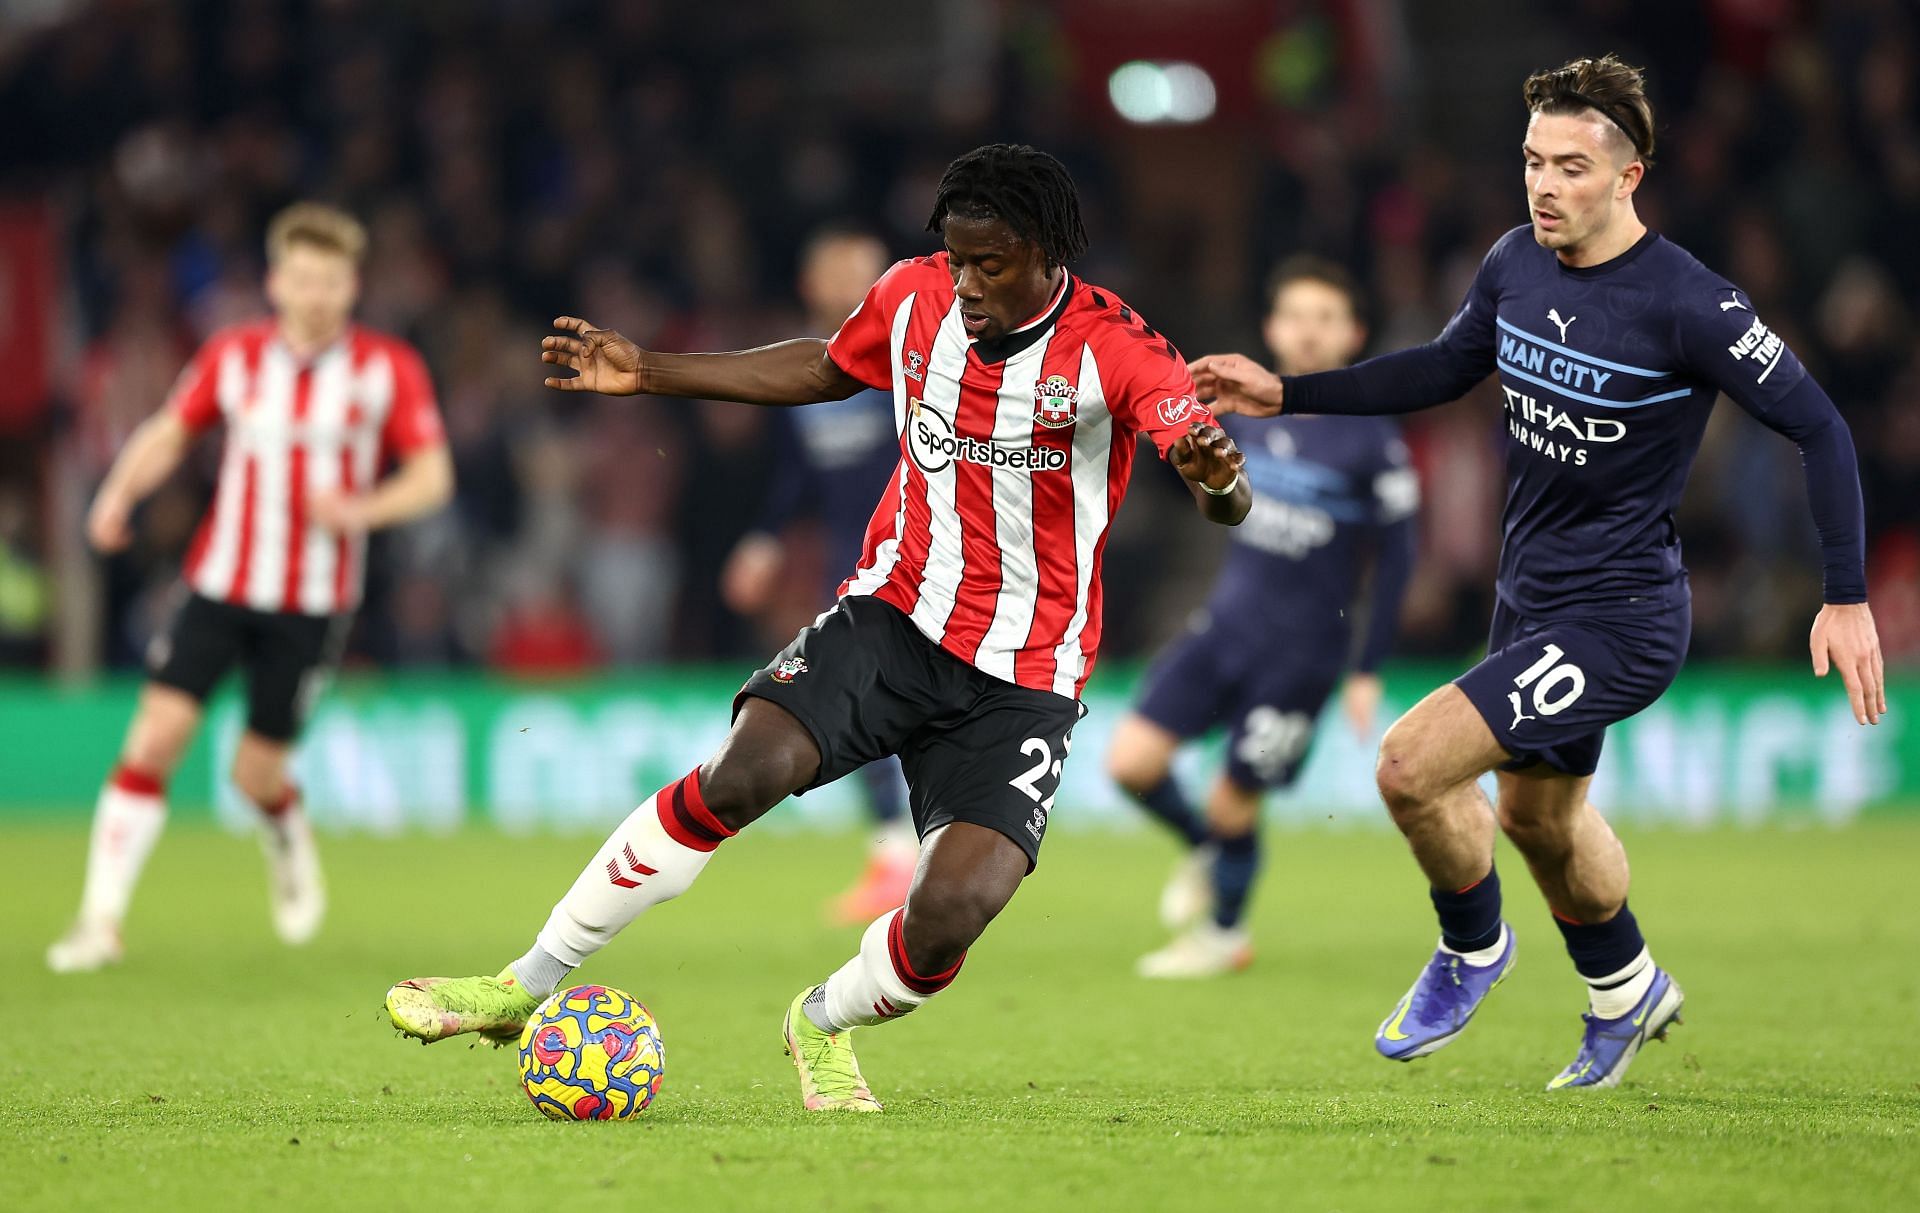 Southampton and Manchester City face off in the FA Cup quarter-final fixture on Sunday.